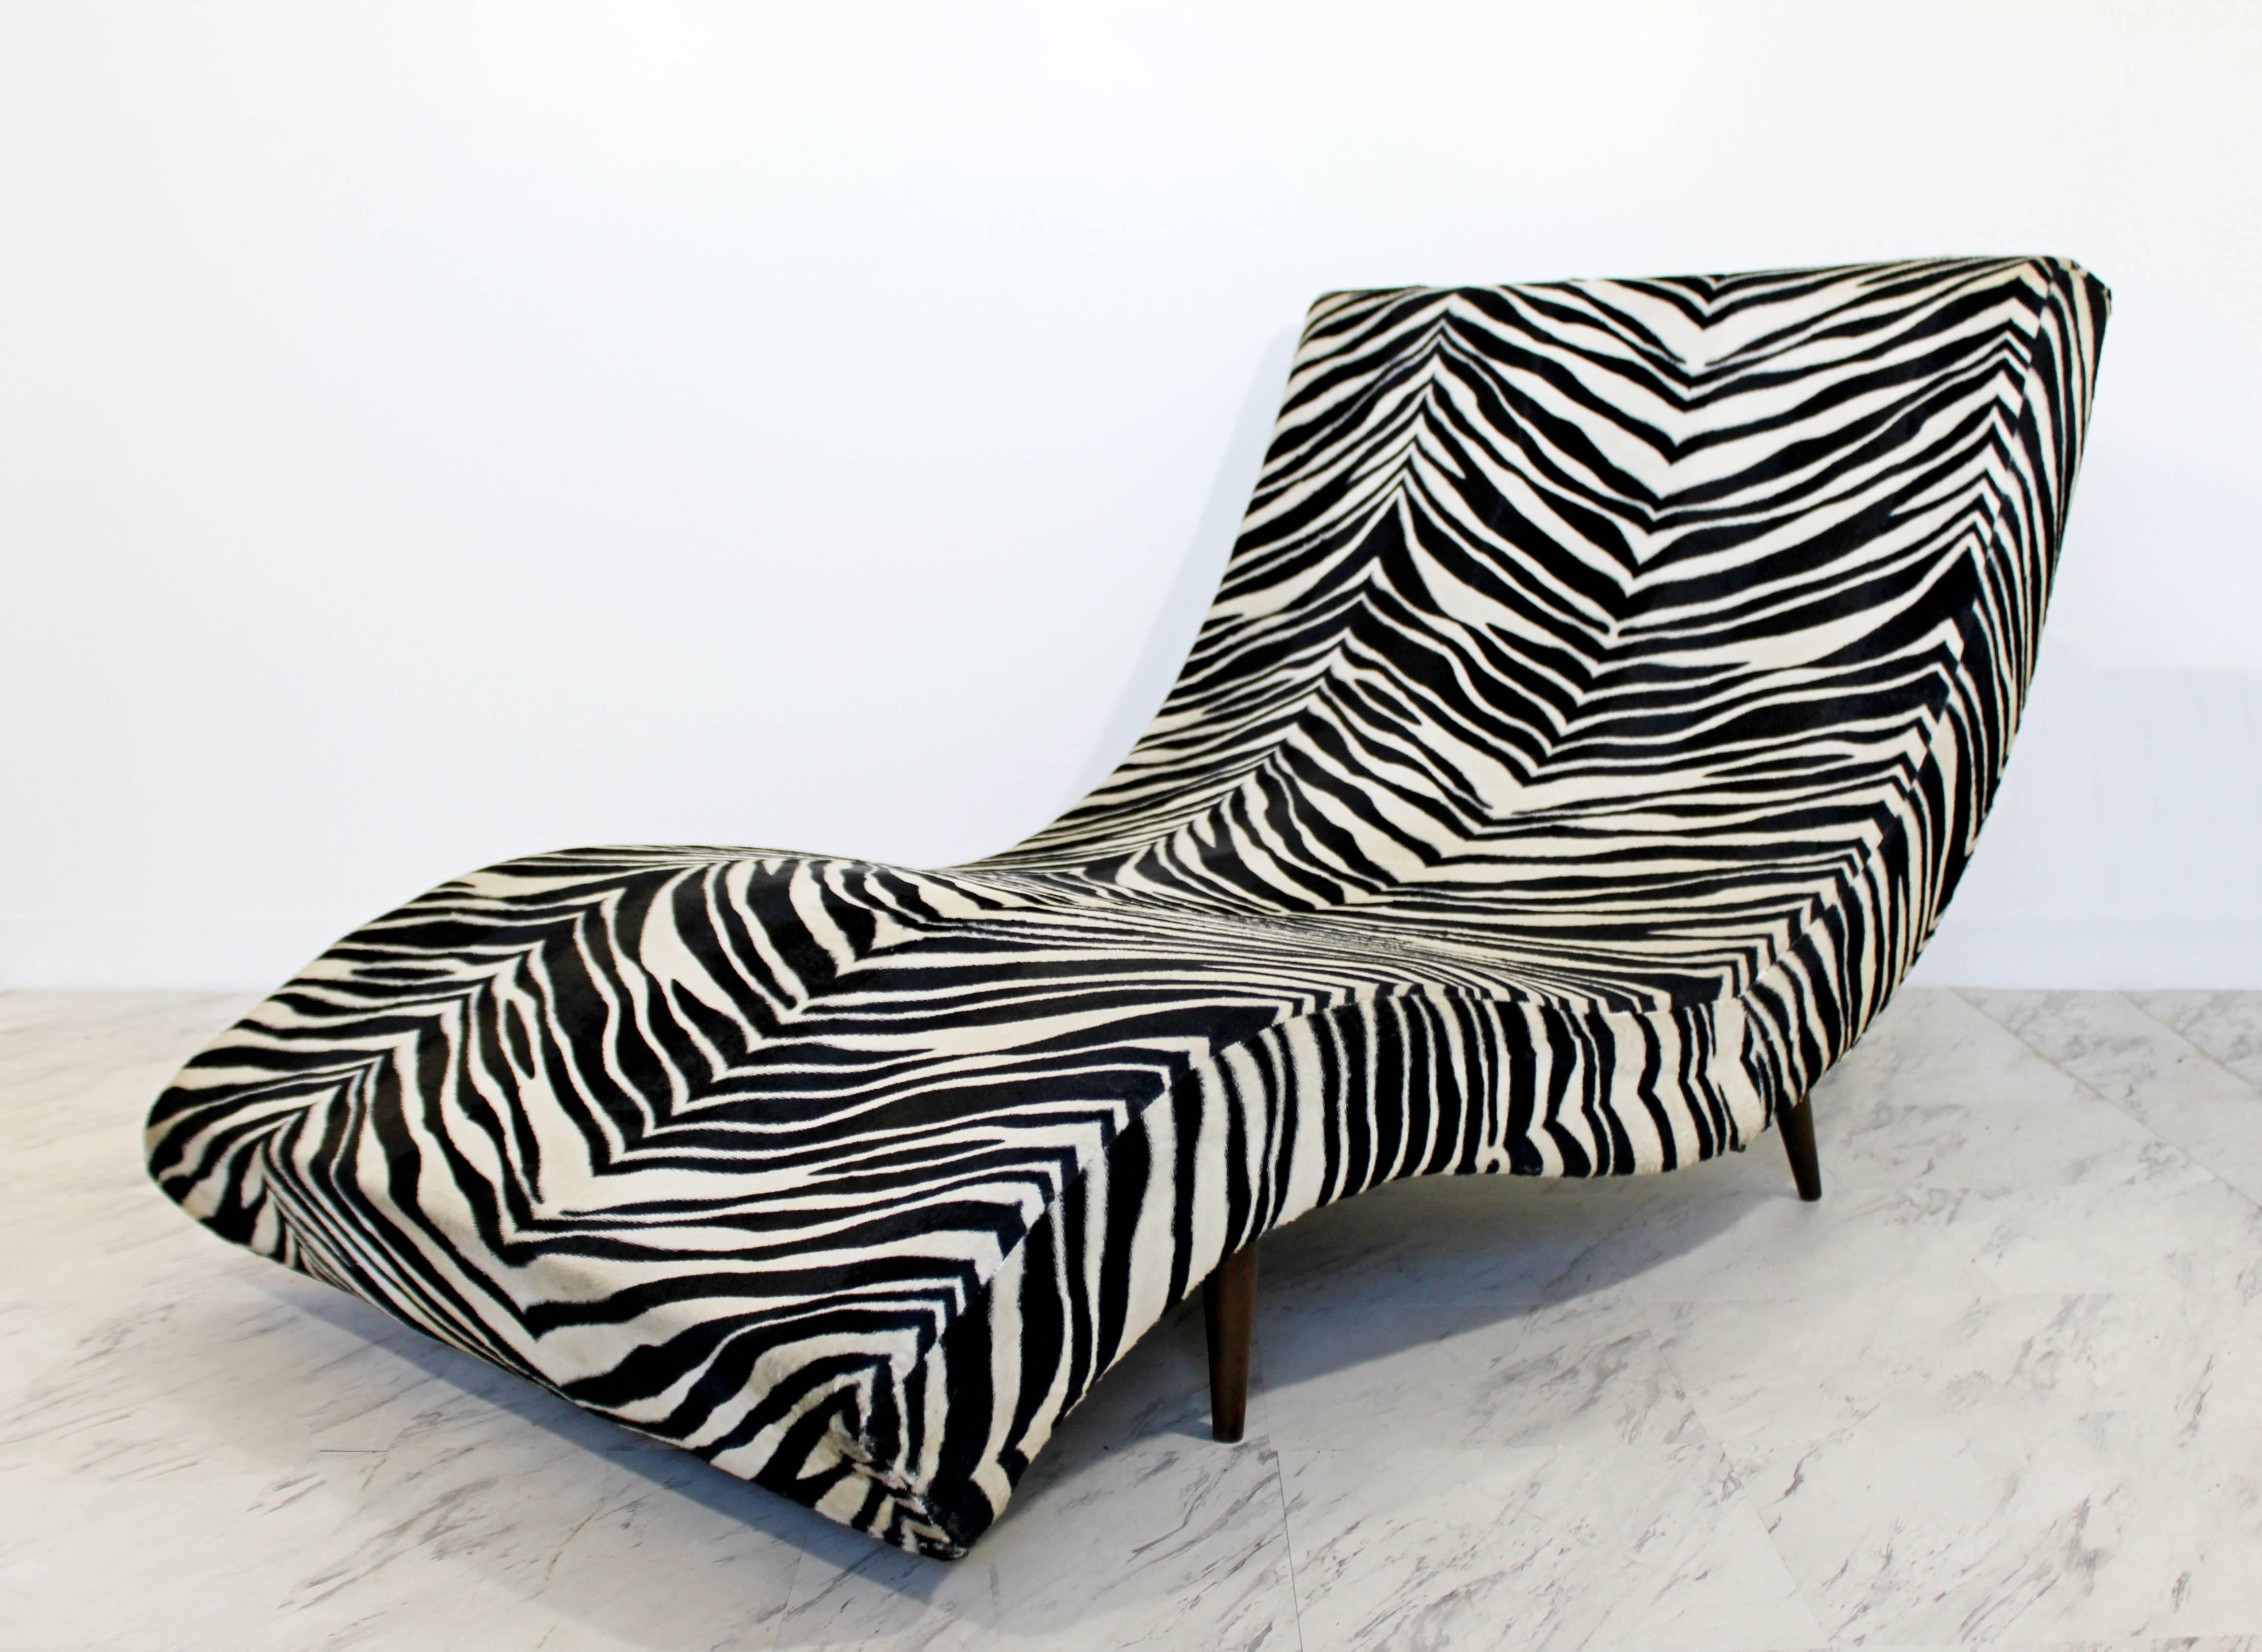 American Mid-Century Modern Adrian Pearsall Craft Wave Form Zebra Chaise Lounge Chair